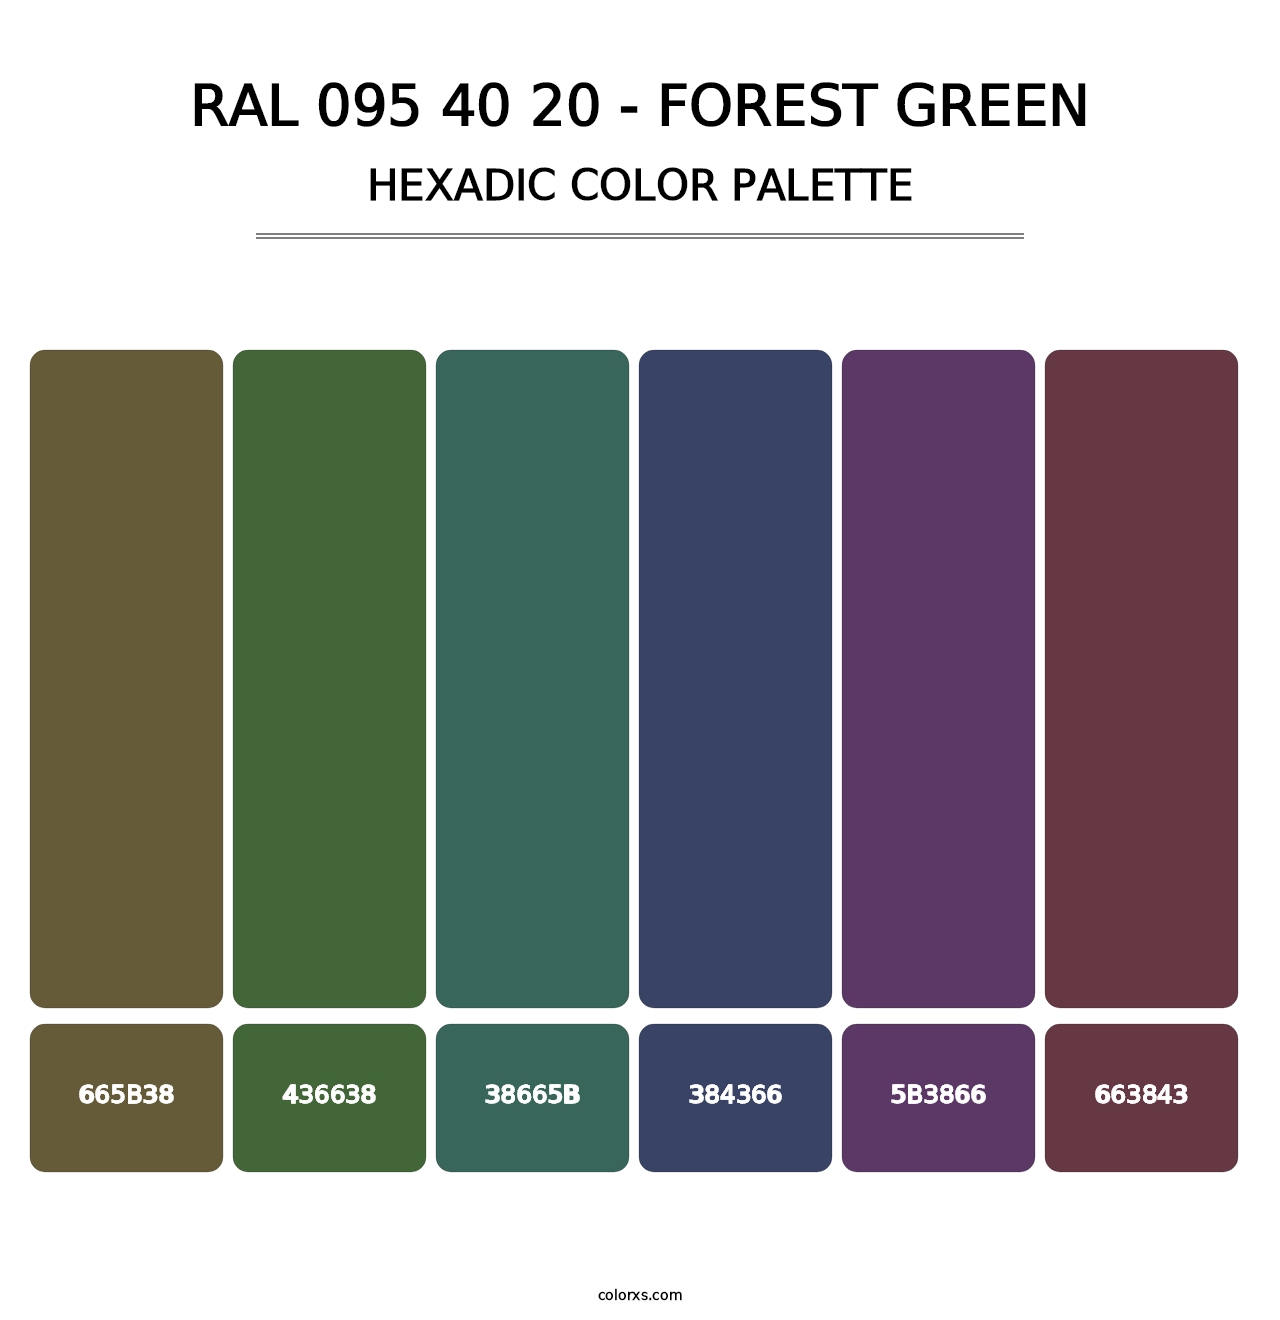 RAL 095 40 20 - Forest Green - Hexadic Color Palette